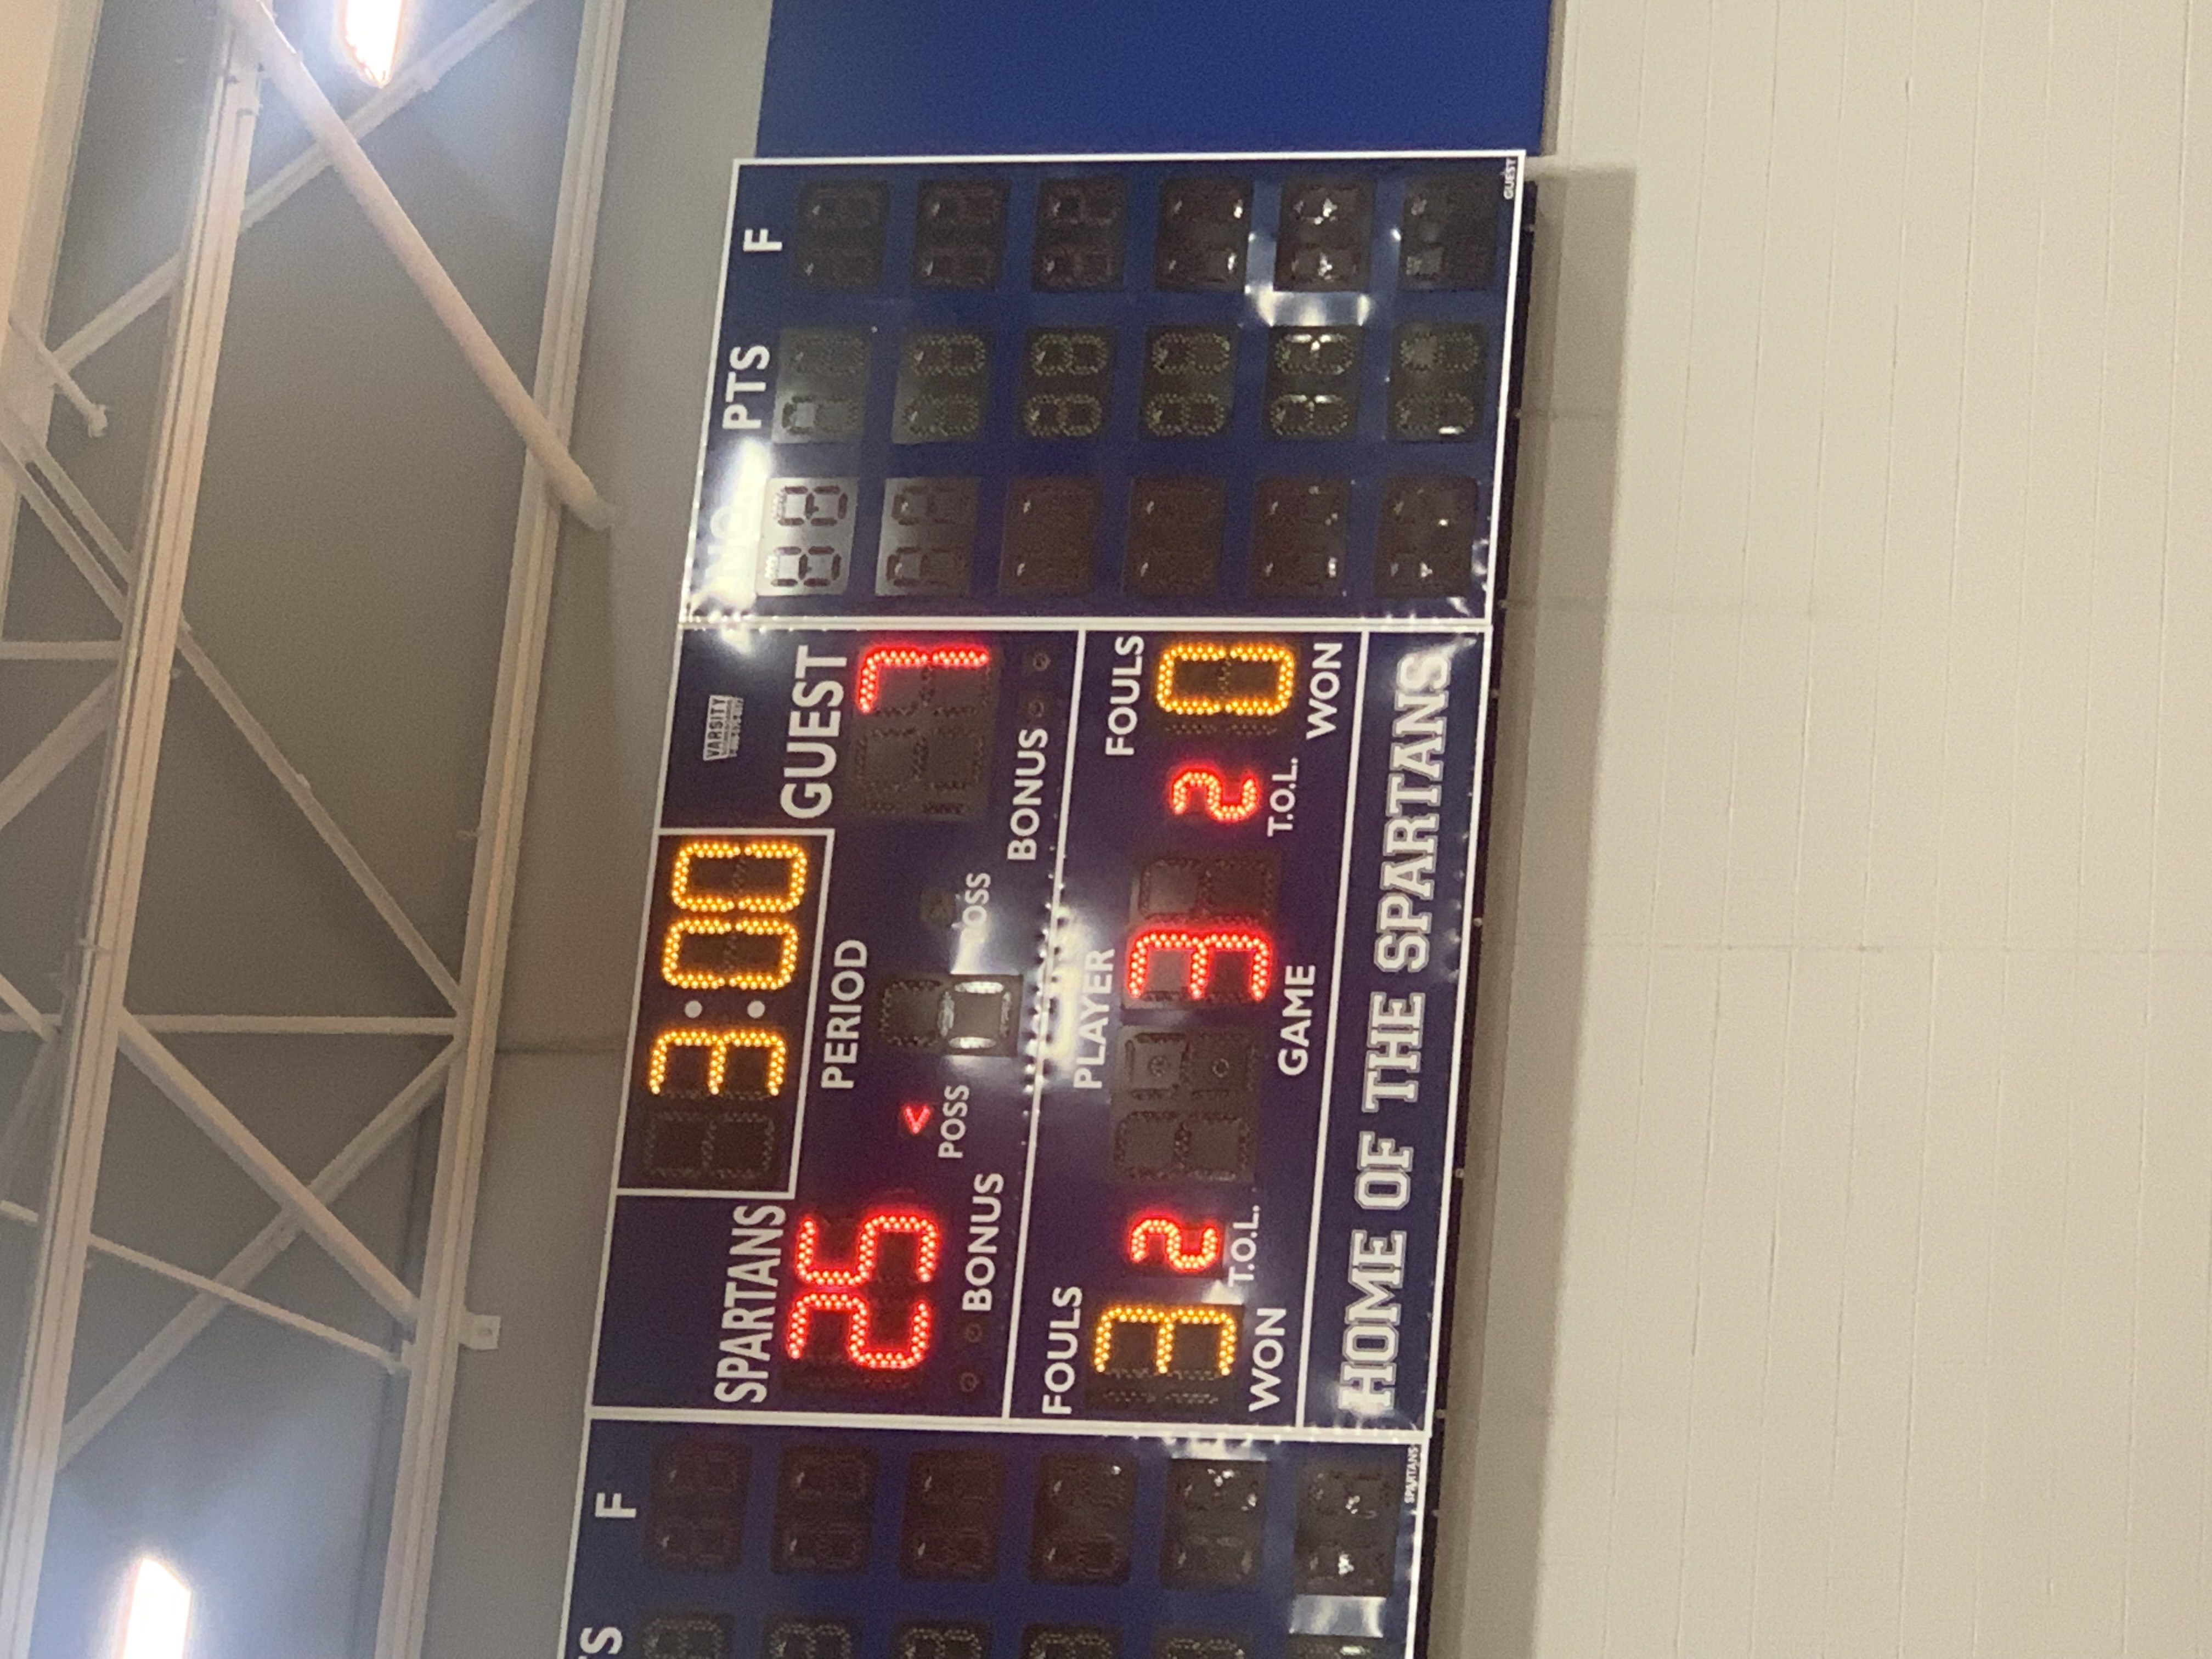 The scoreboard at the volleyball game showing we won on August 21, 2021